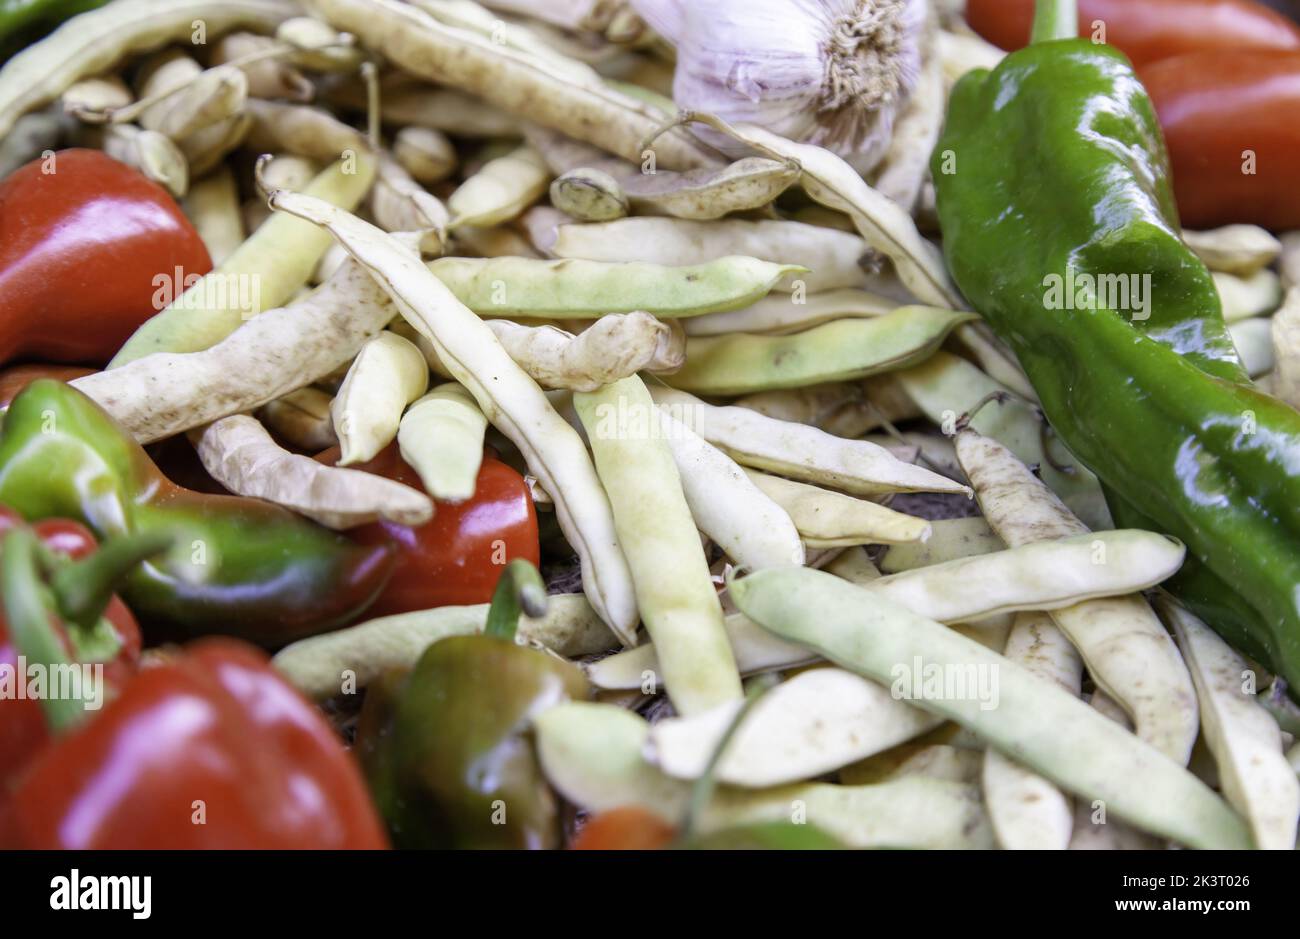 Green beans and peppers in food market, agriculture Stock Photo